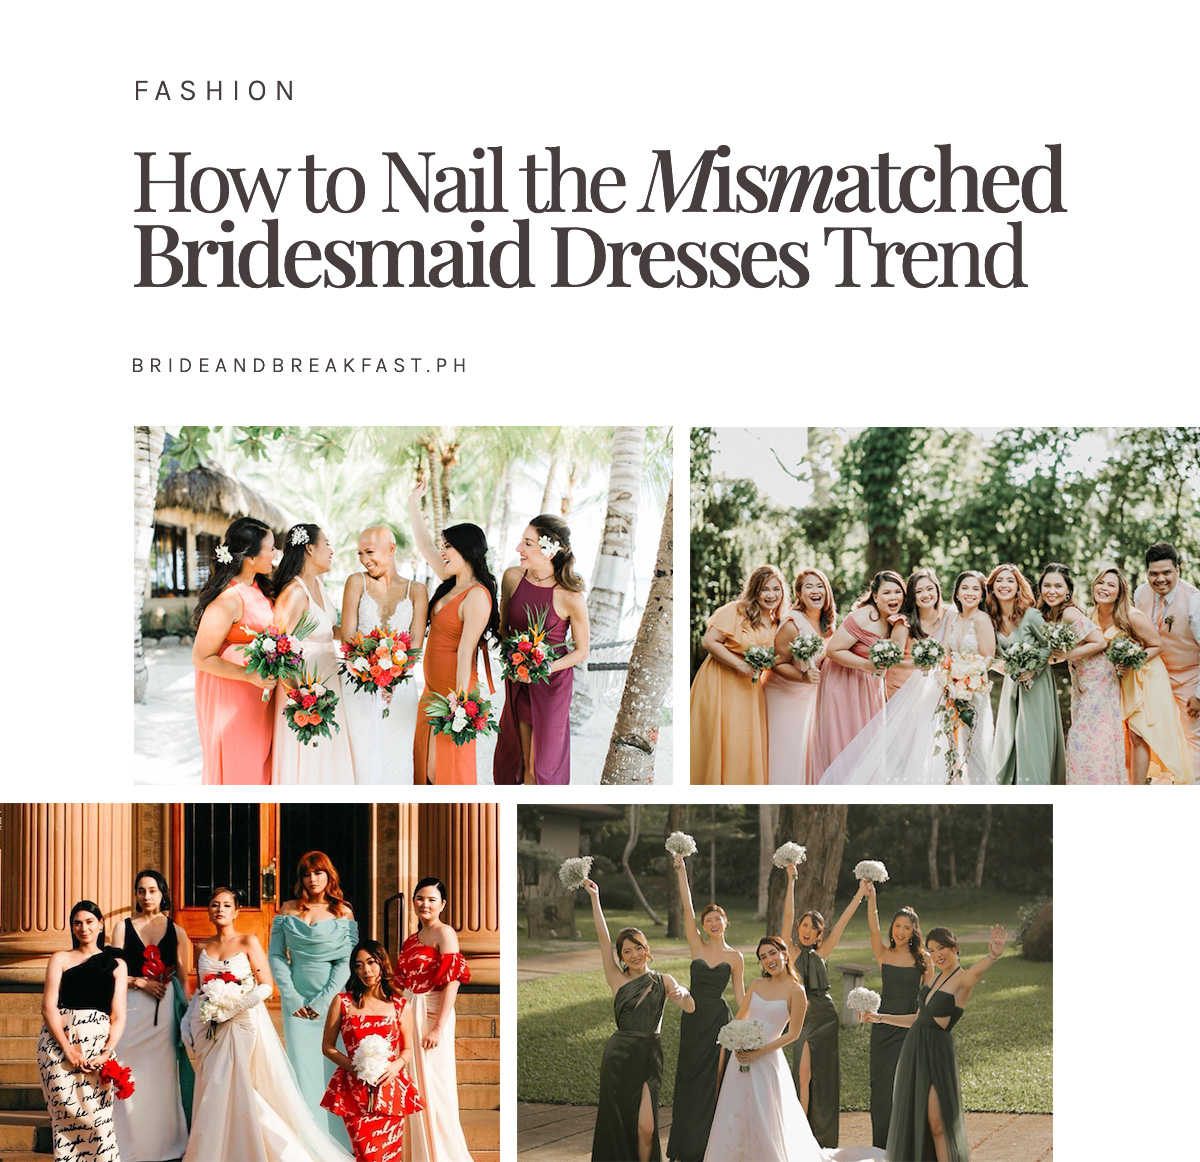 How to Nail the Mismatched Bridesmaid Dresses Trend